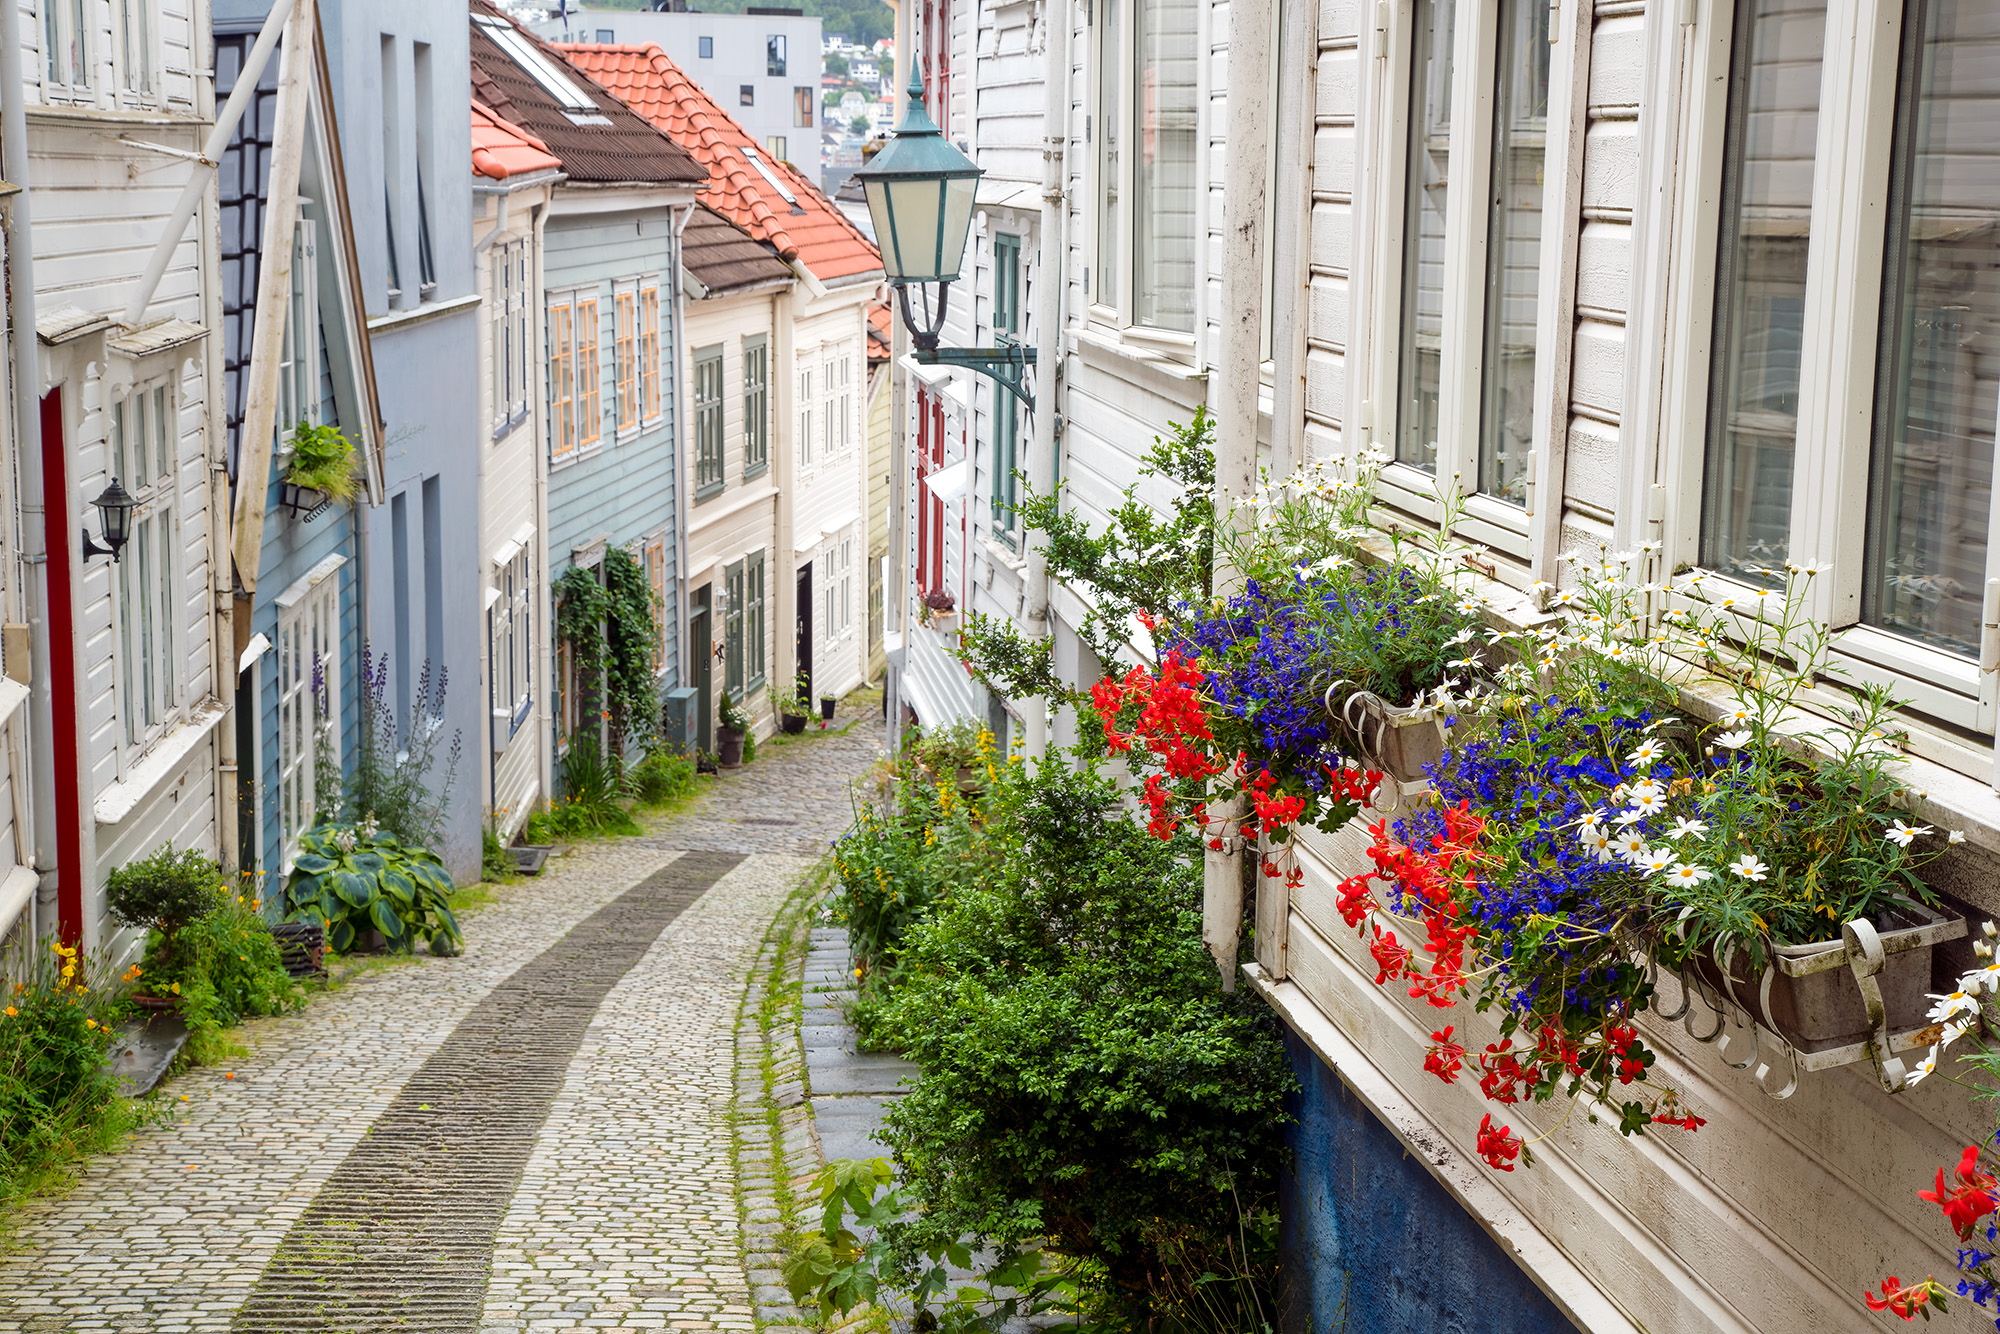 Captured in Bergen, Norway, this snapshot features a charming curved street flanked by rows of traditional homes. On the right...